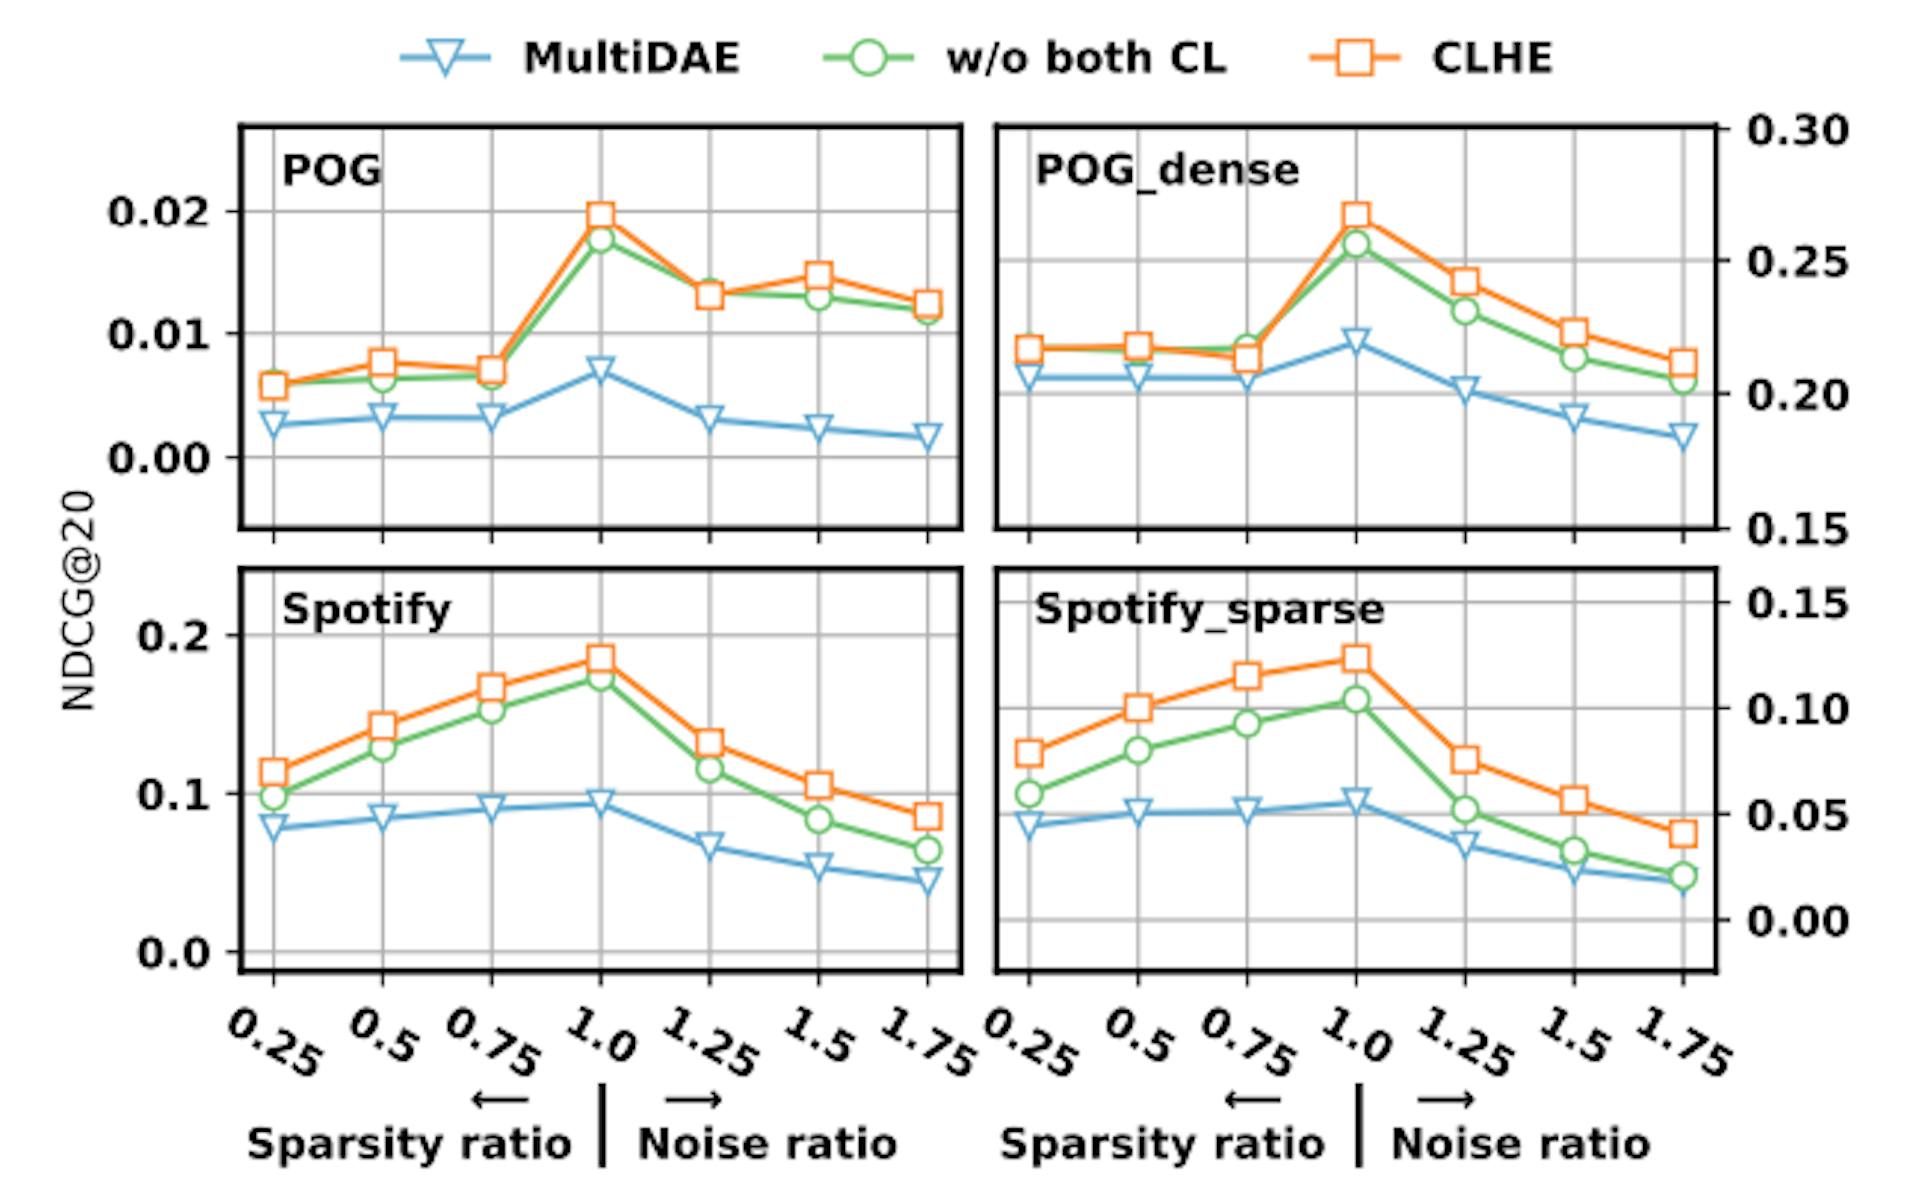 Figure 3: Performance analysis with varying rates of sparsity and noise in the partial bundle.